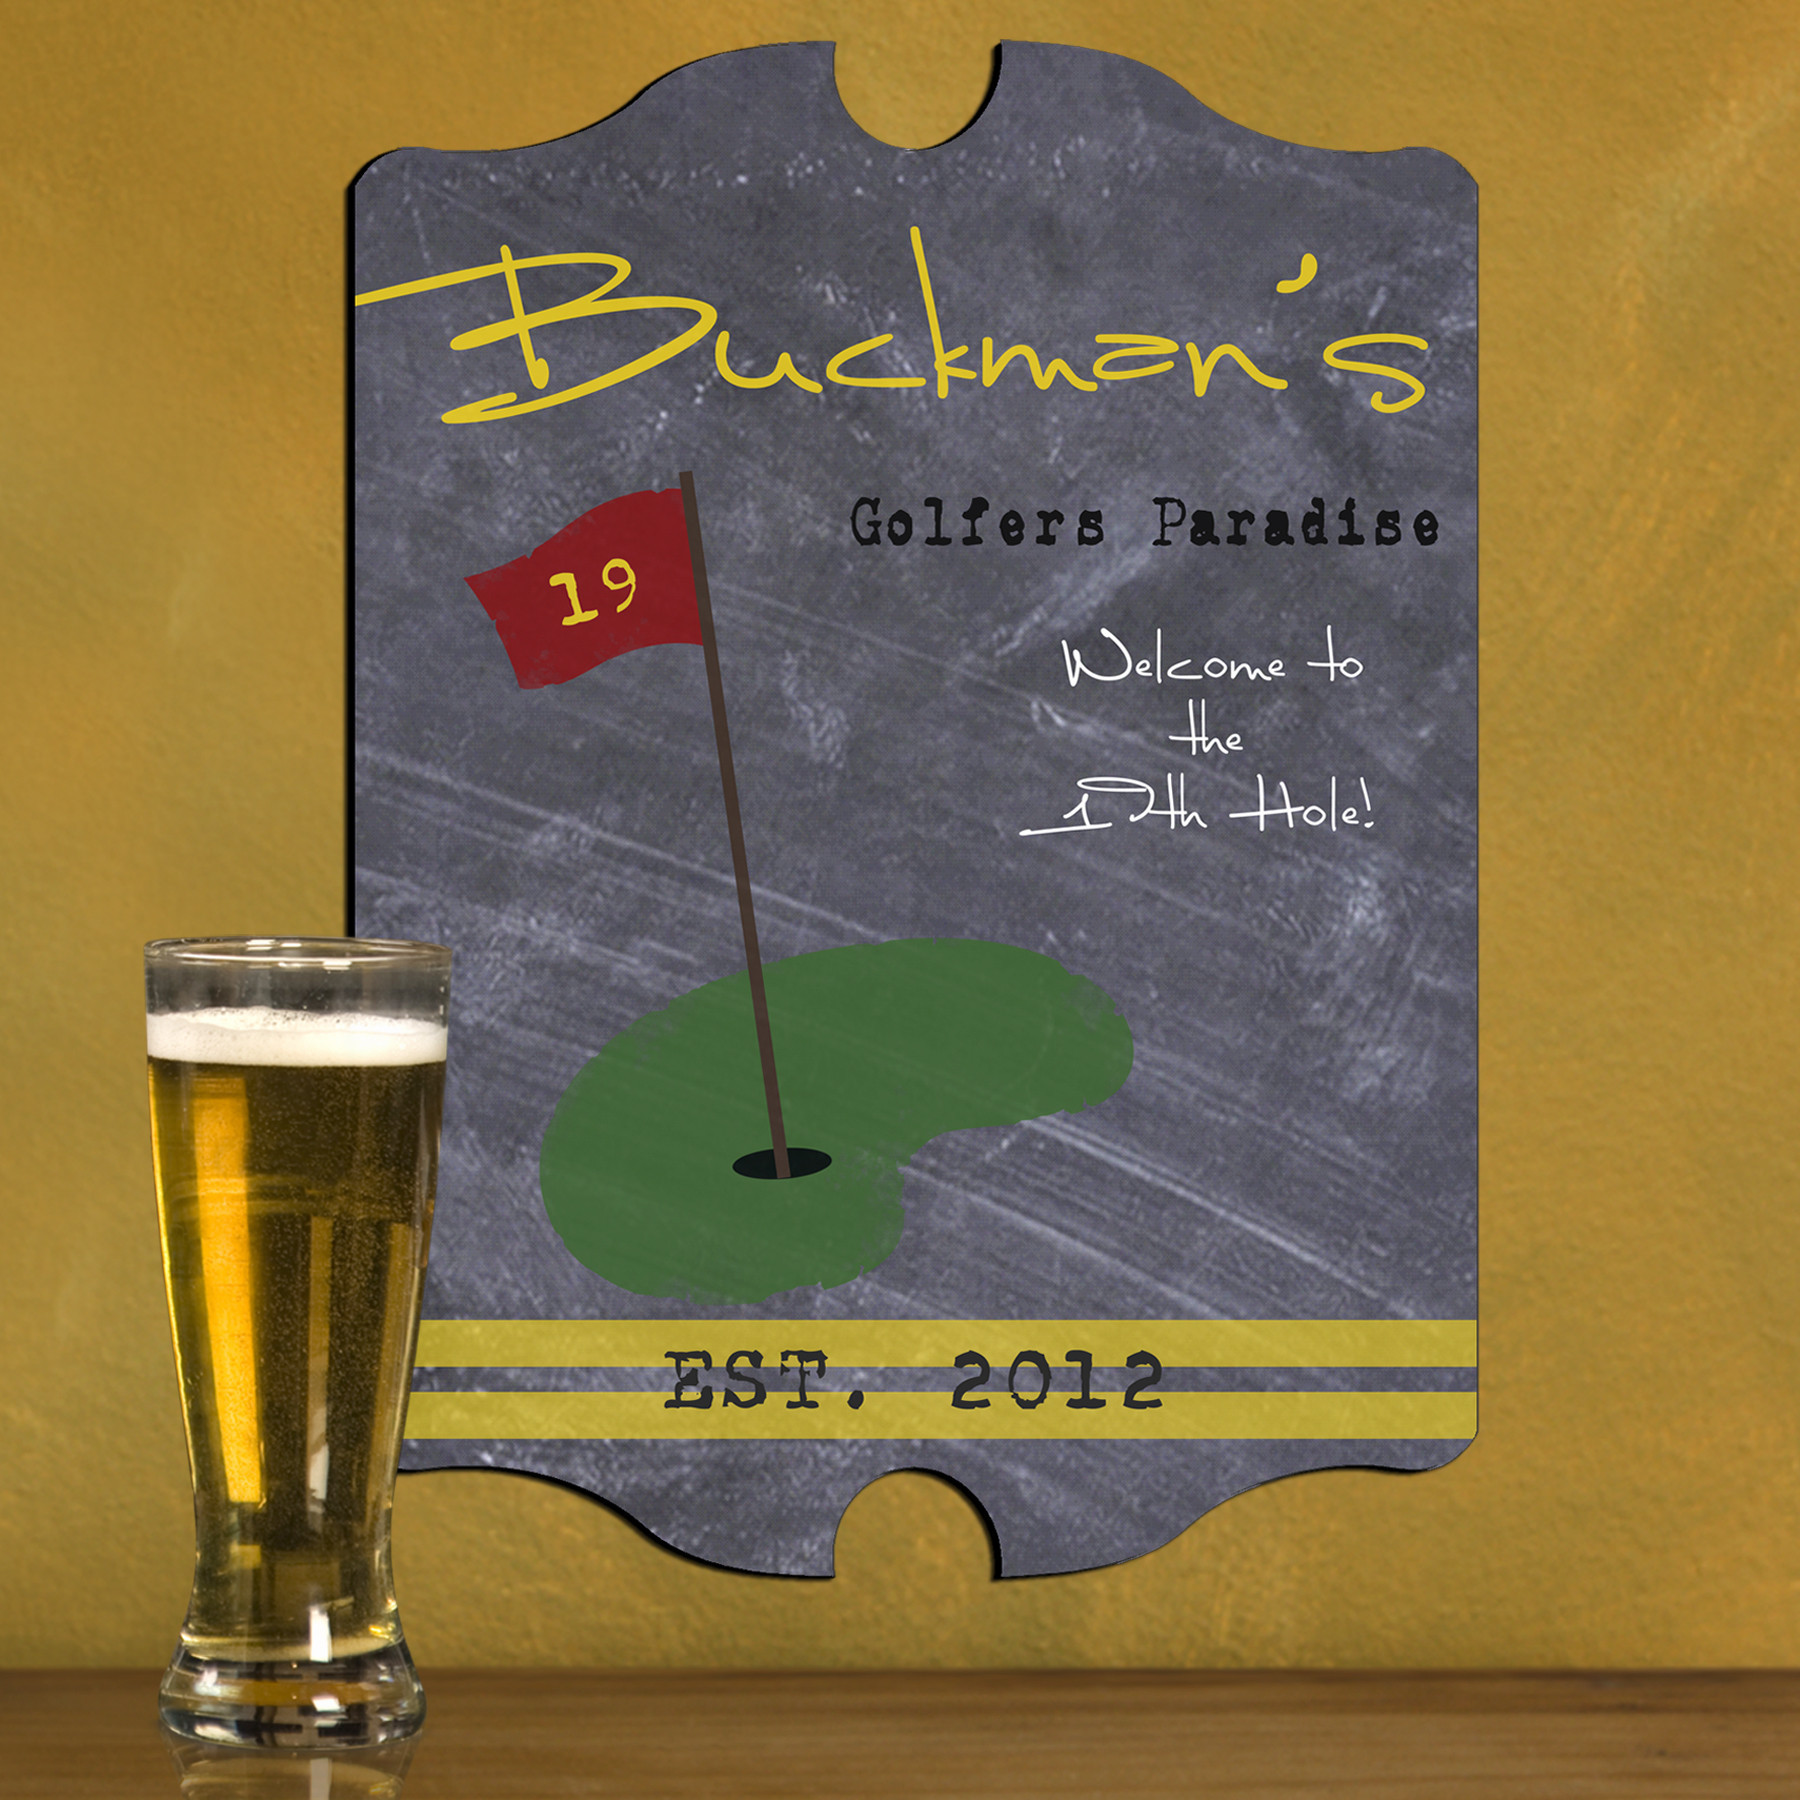 Make his man cave, home bar, den or even his office into the 19th hole with this custom bar plaque! This golfing gift is way above par! Deck out his man cave or clubhouse with a vintage Chalkboard Golf tavern sign to combine his favorite sport with his fa #vintage